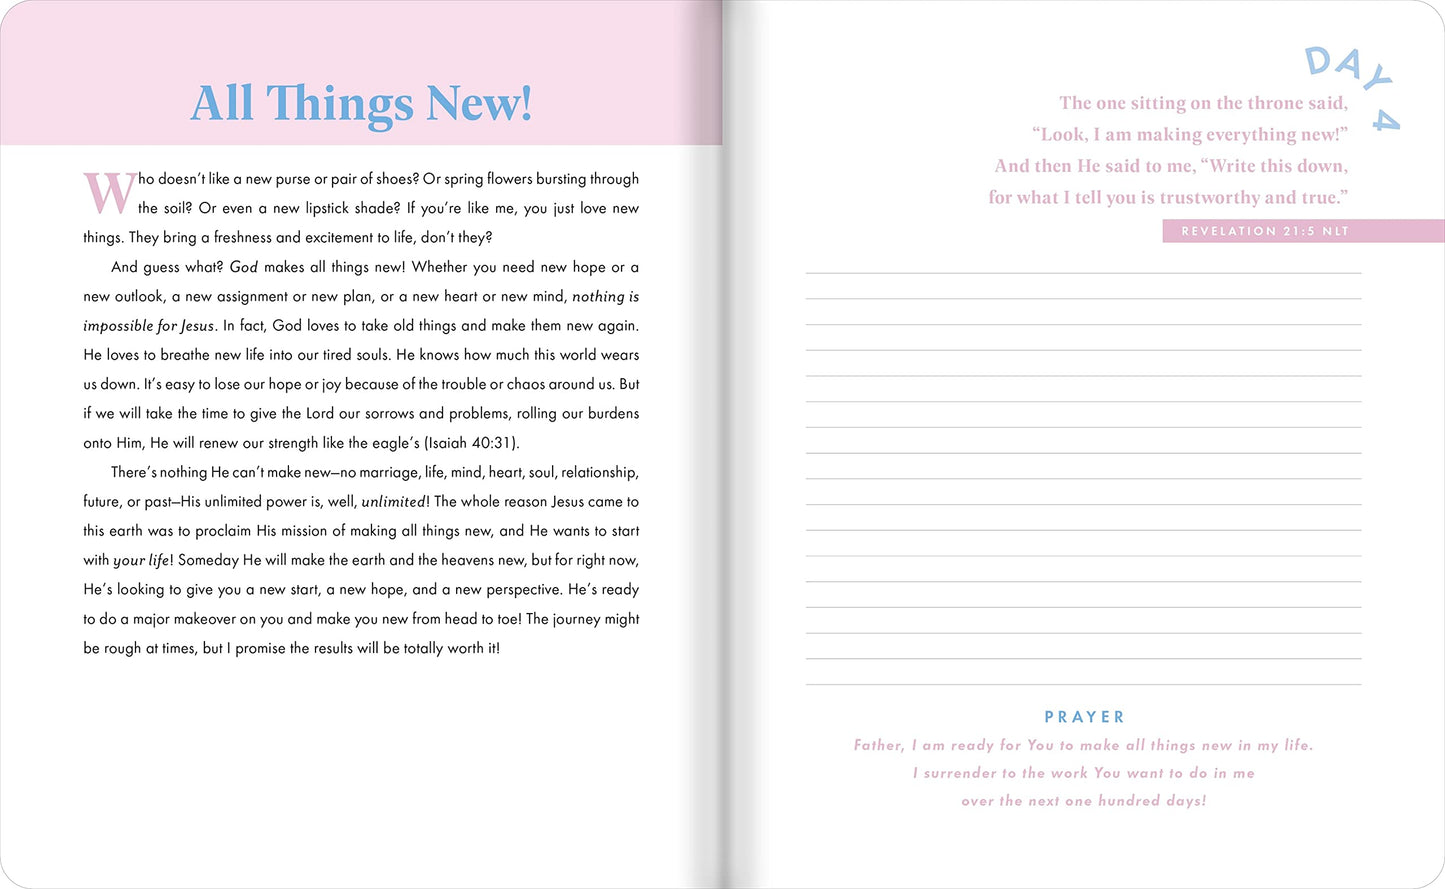 100 Days of All Things New: A Devotional Journal